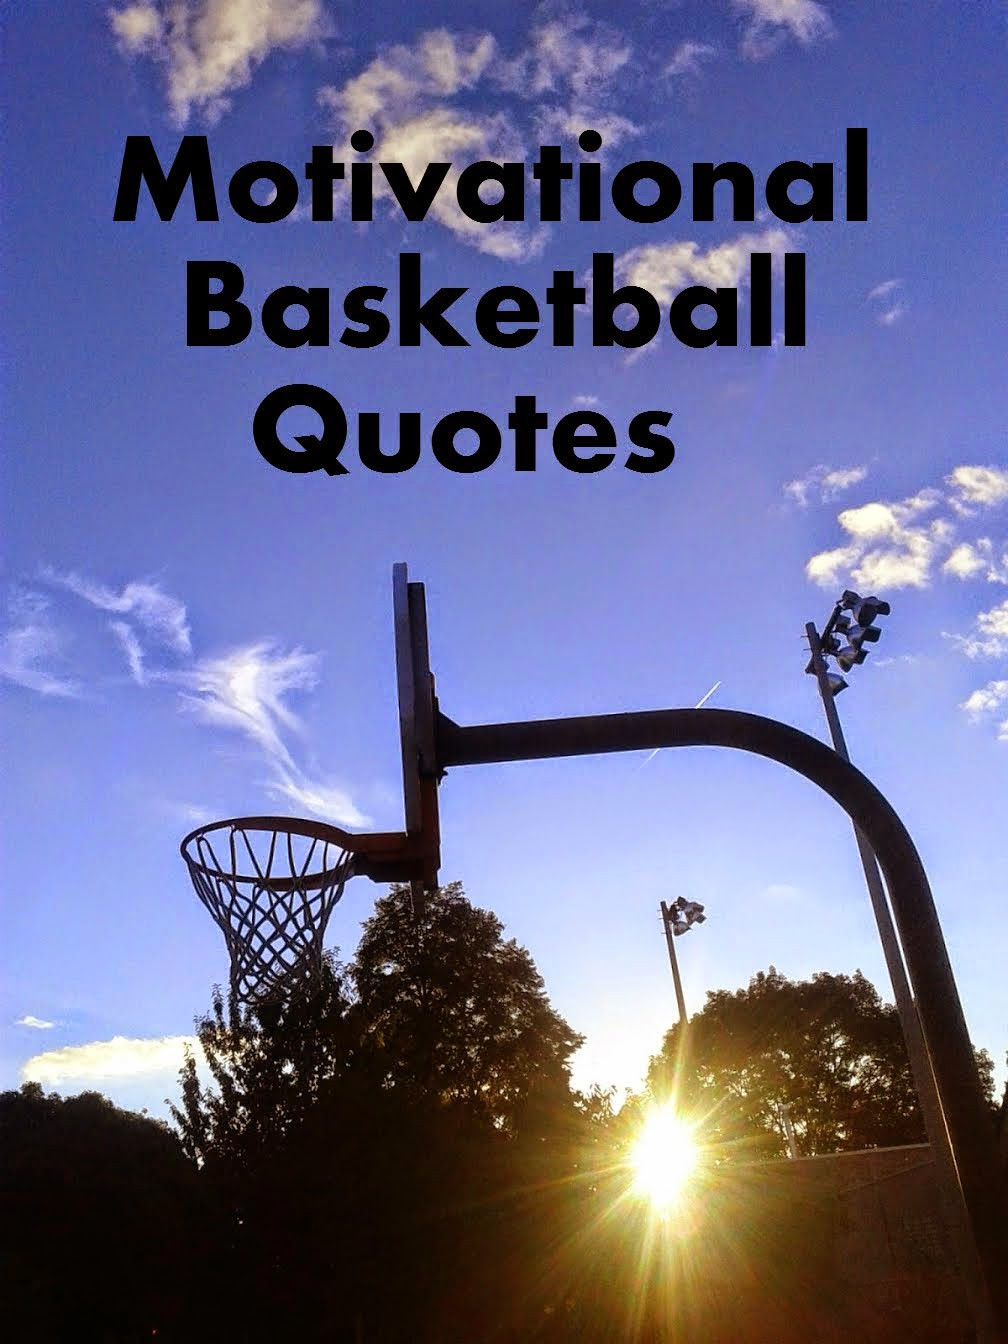 Girls Motivational Quotes
 Motivational Basketball Quotes For Girls QuotesGram